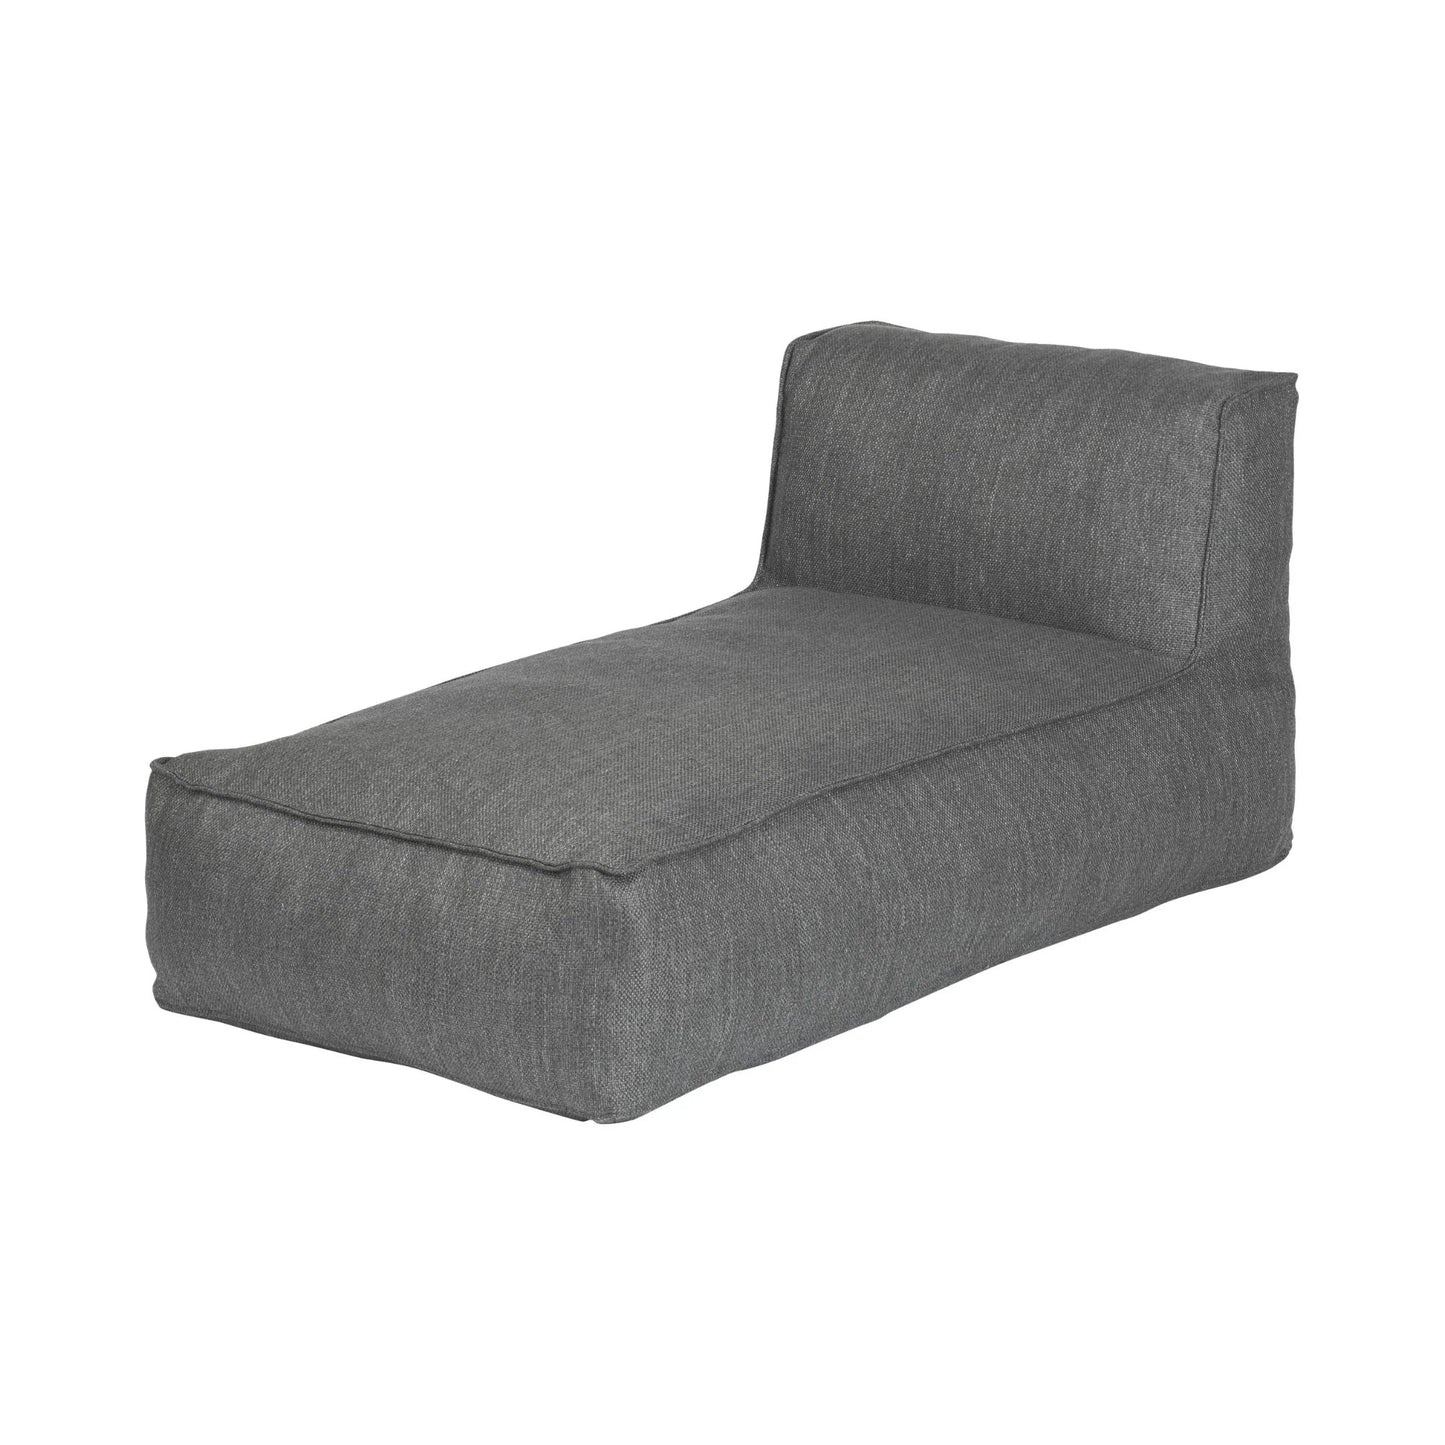 Blomus Grow Single Chaise Sectional Outdoor Patio Lounger Coal 62073